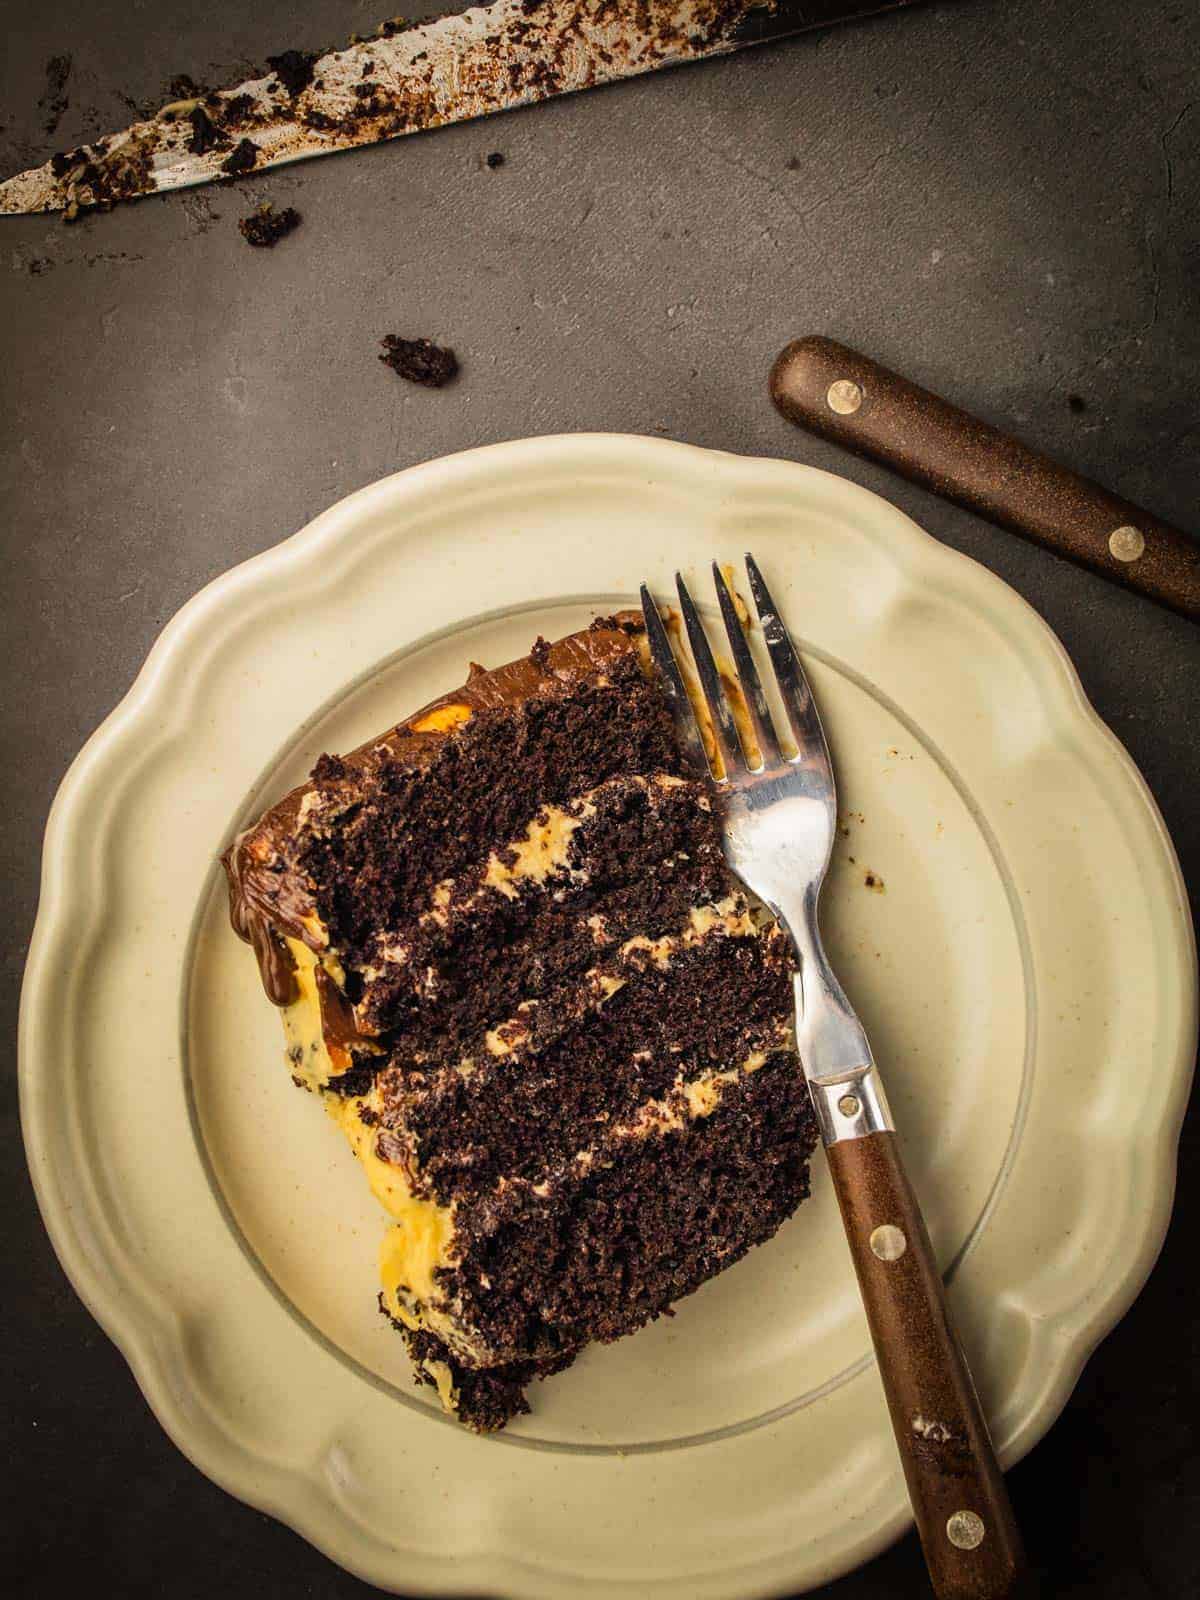 slice of chocolate cake layered with salted caramel buttercream and topped with ganache on plate